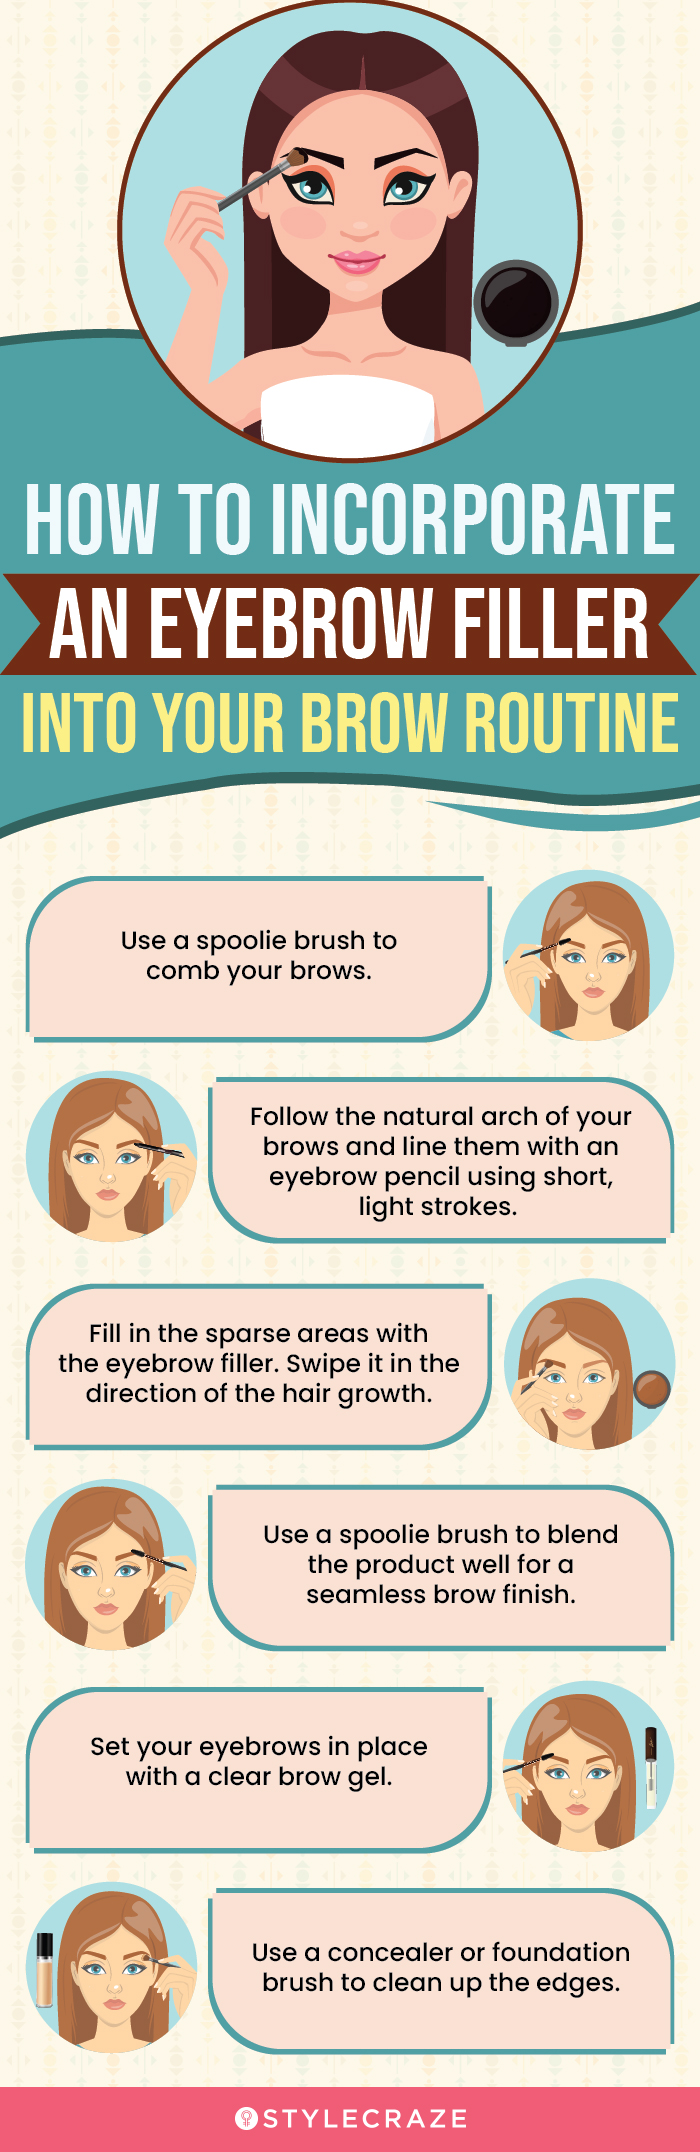 How To Incorporate An Eyebrow Filler Into Your Brow Routine (infographic)